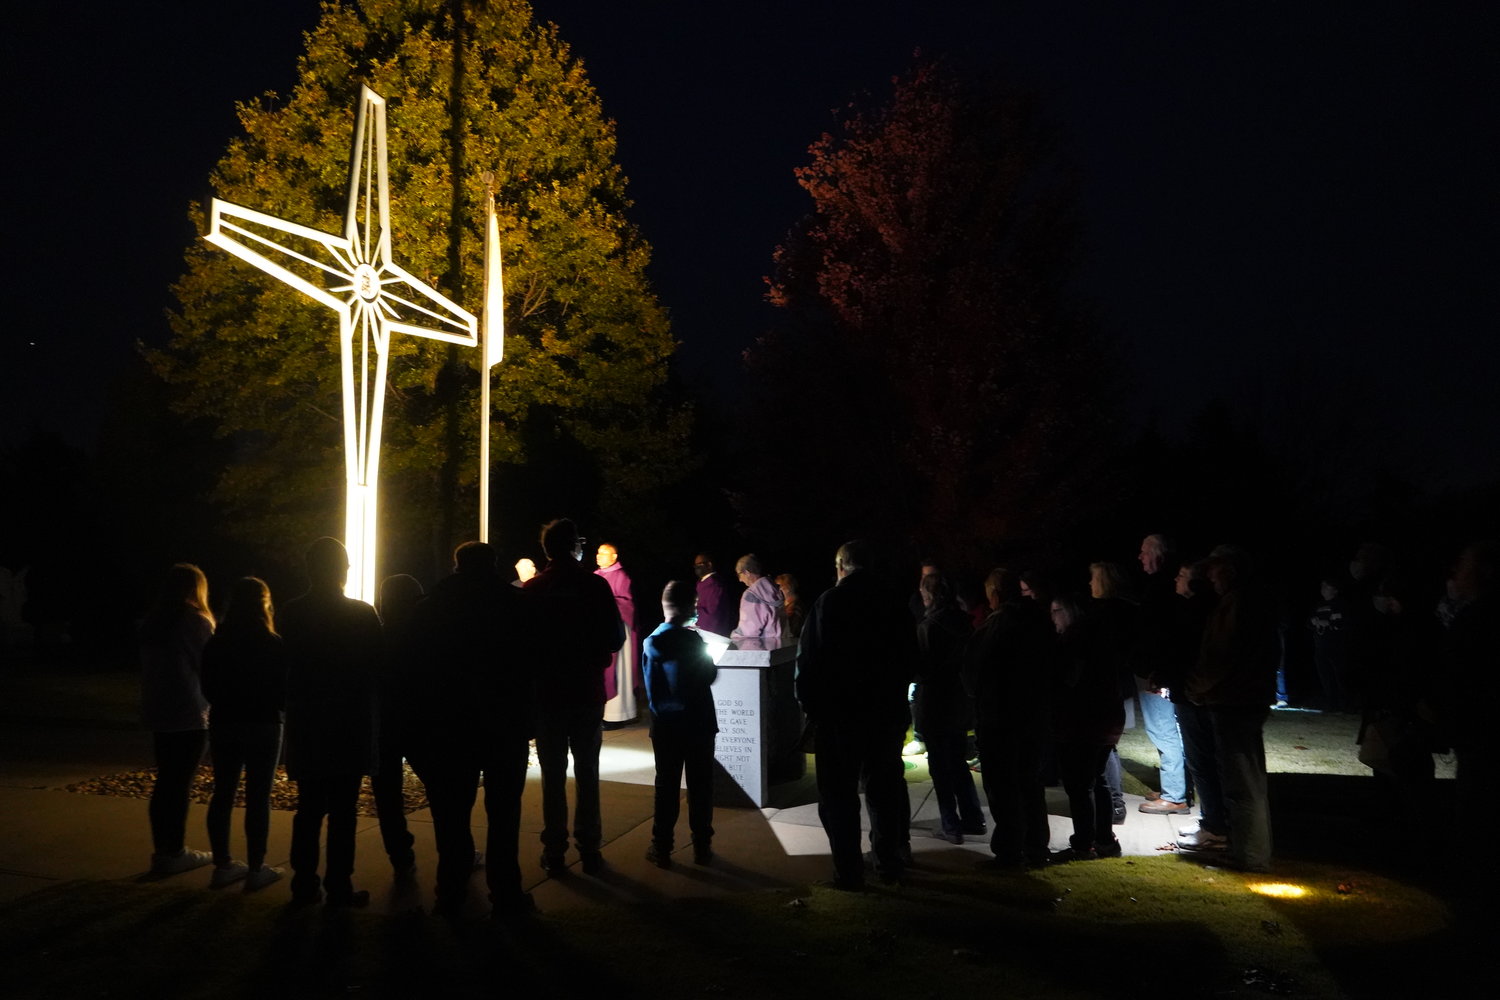 Father Roberto Ike, pastor of St. Andrew Parish in Holts Summit, leads a Rosary Procession from St. Andrew Church to the parish cemetery the evening of Nov. 2, All Souls Day.